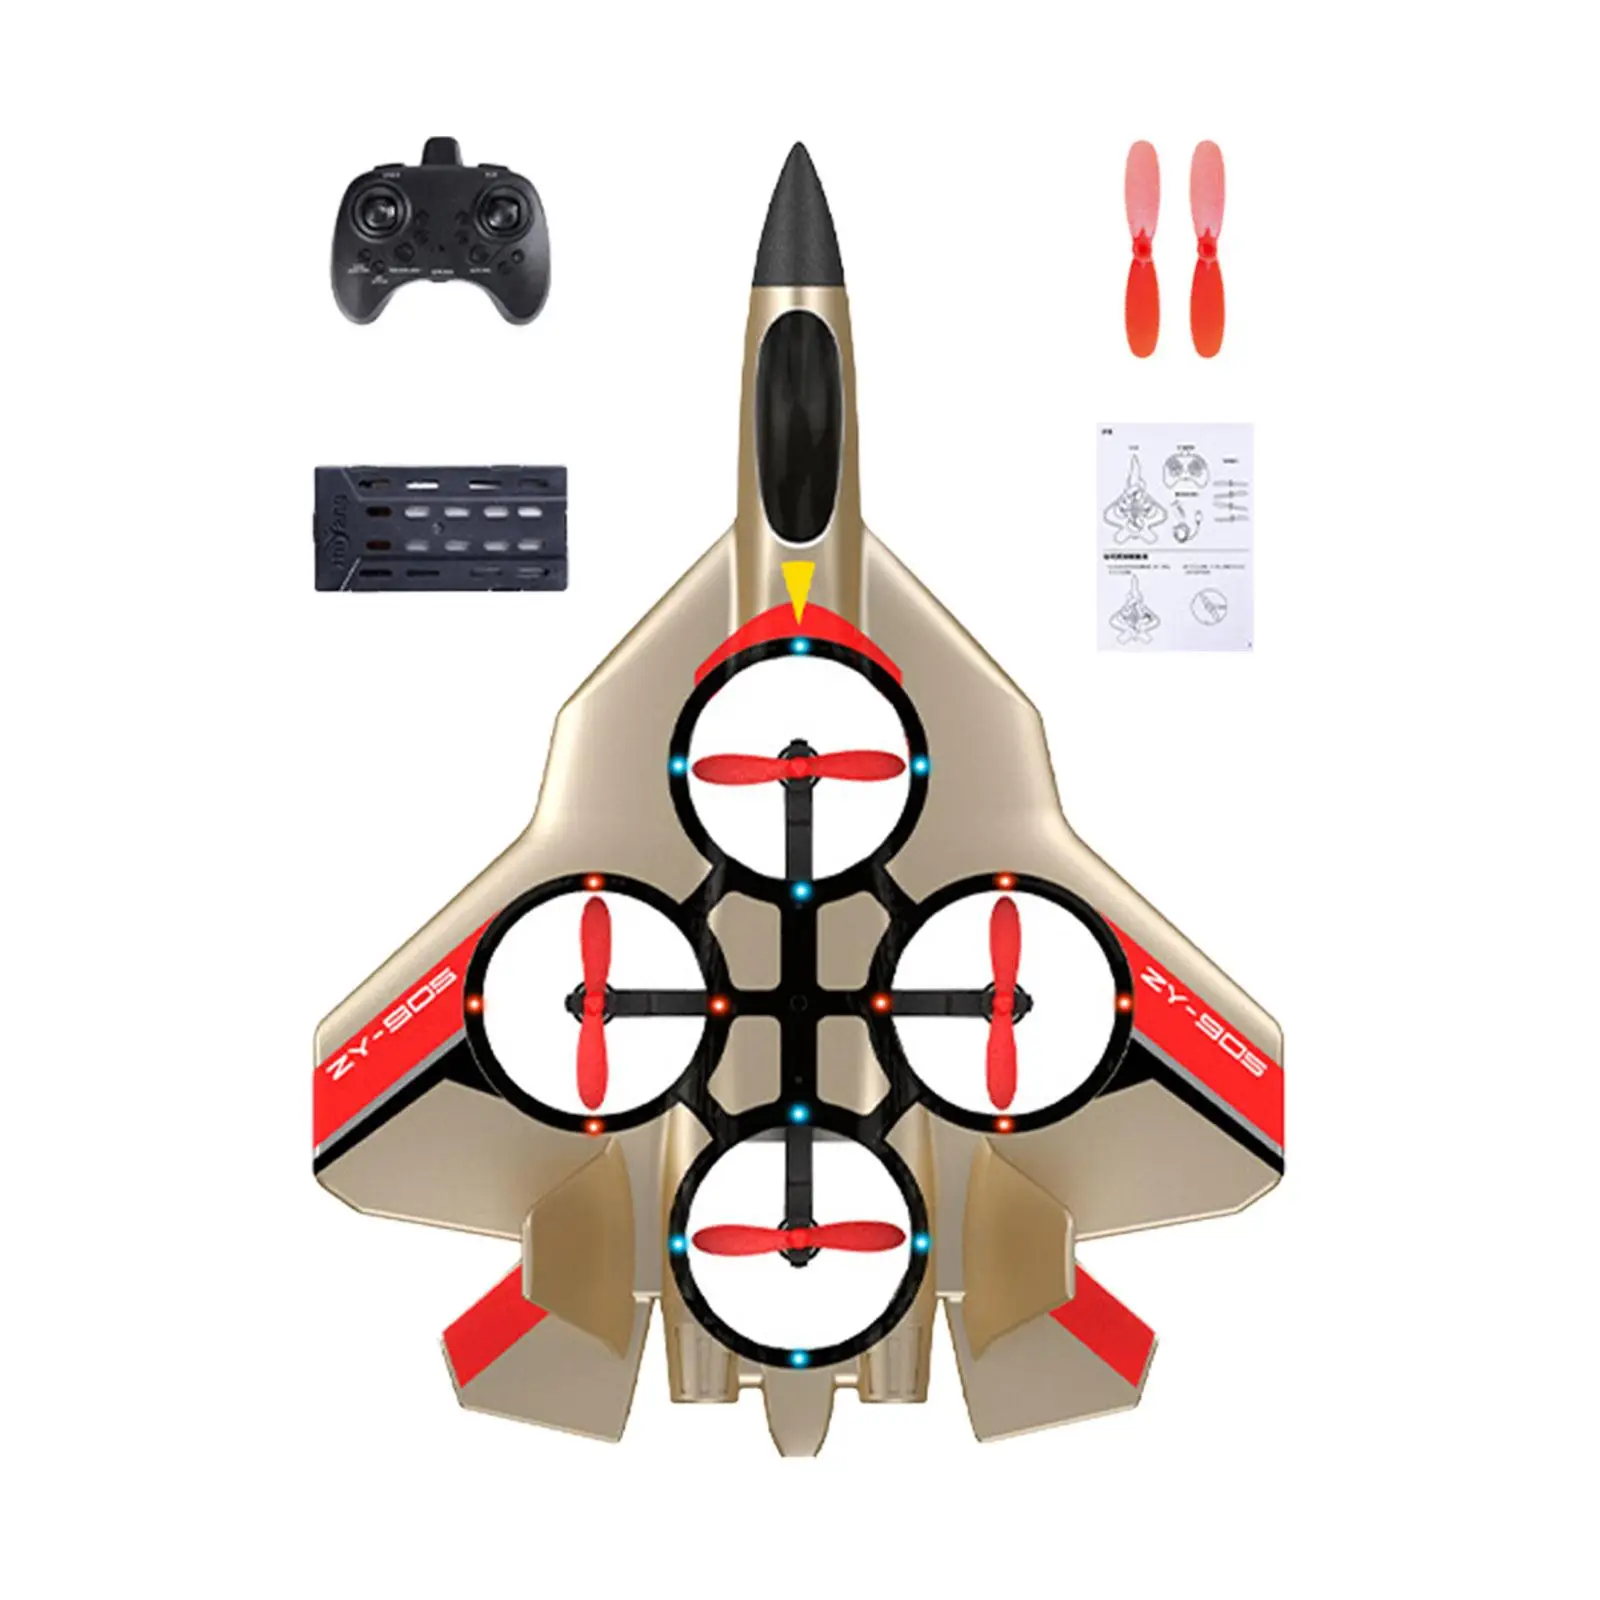 RC Aircraft Jet Lightweight 4 CH Plane 4 Channel RC Glider Remote Control Airplane for Kids Adults Beginner Boys Girls Gift